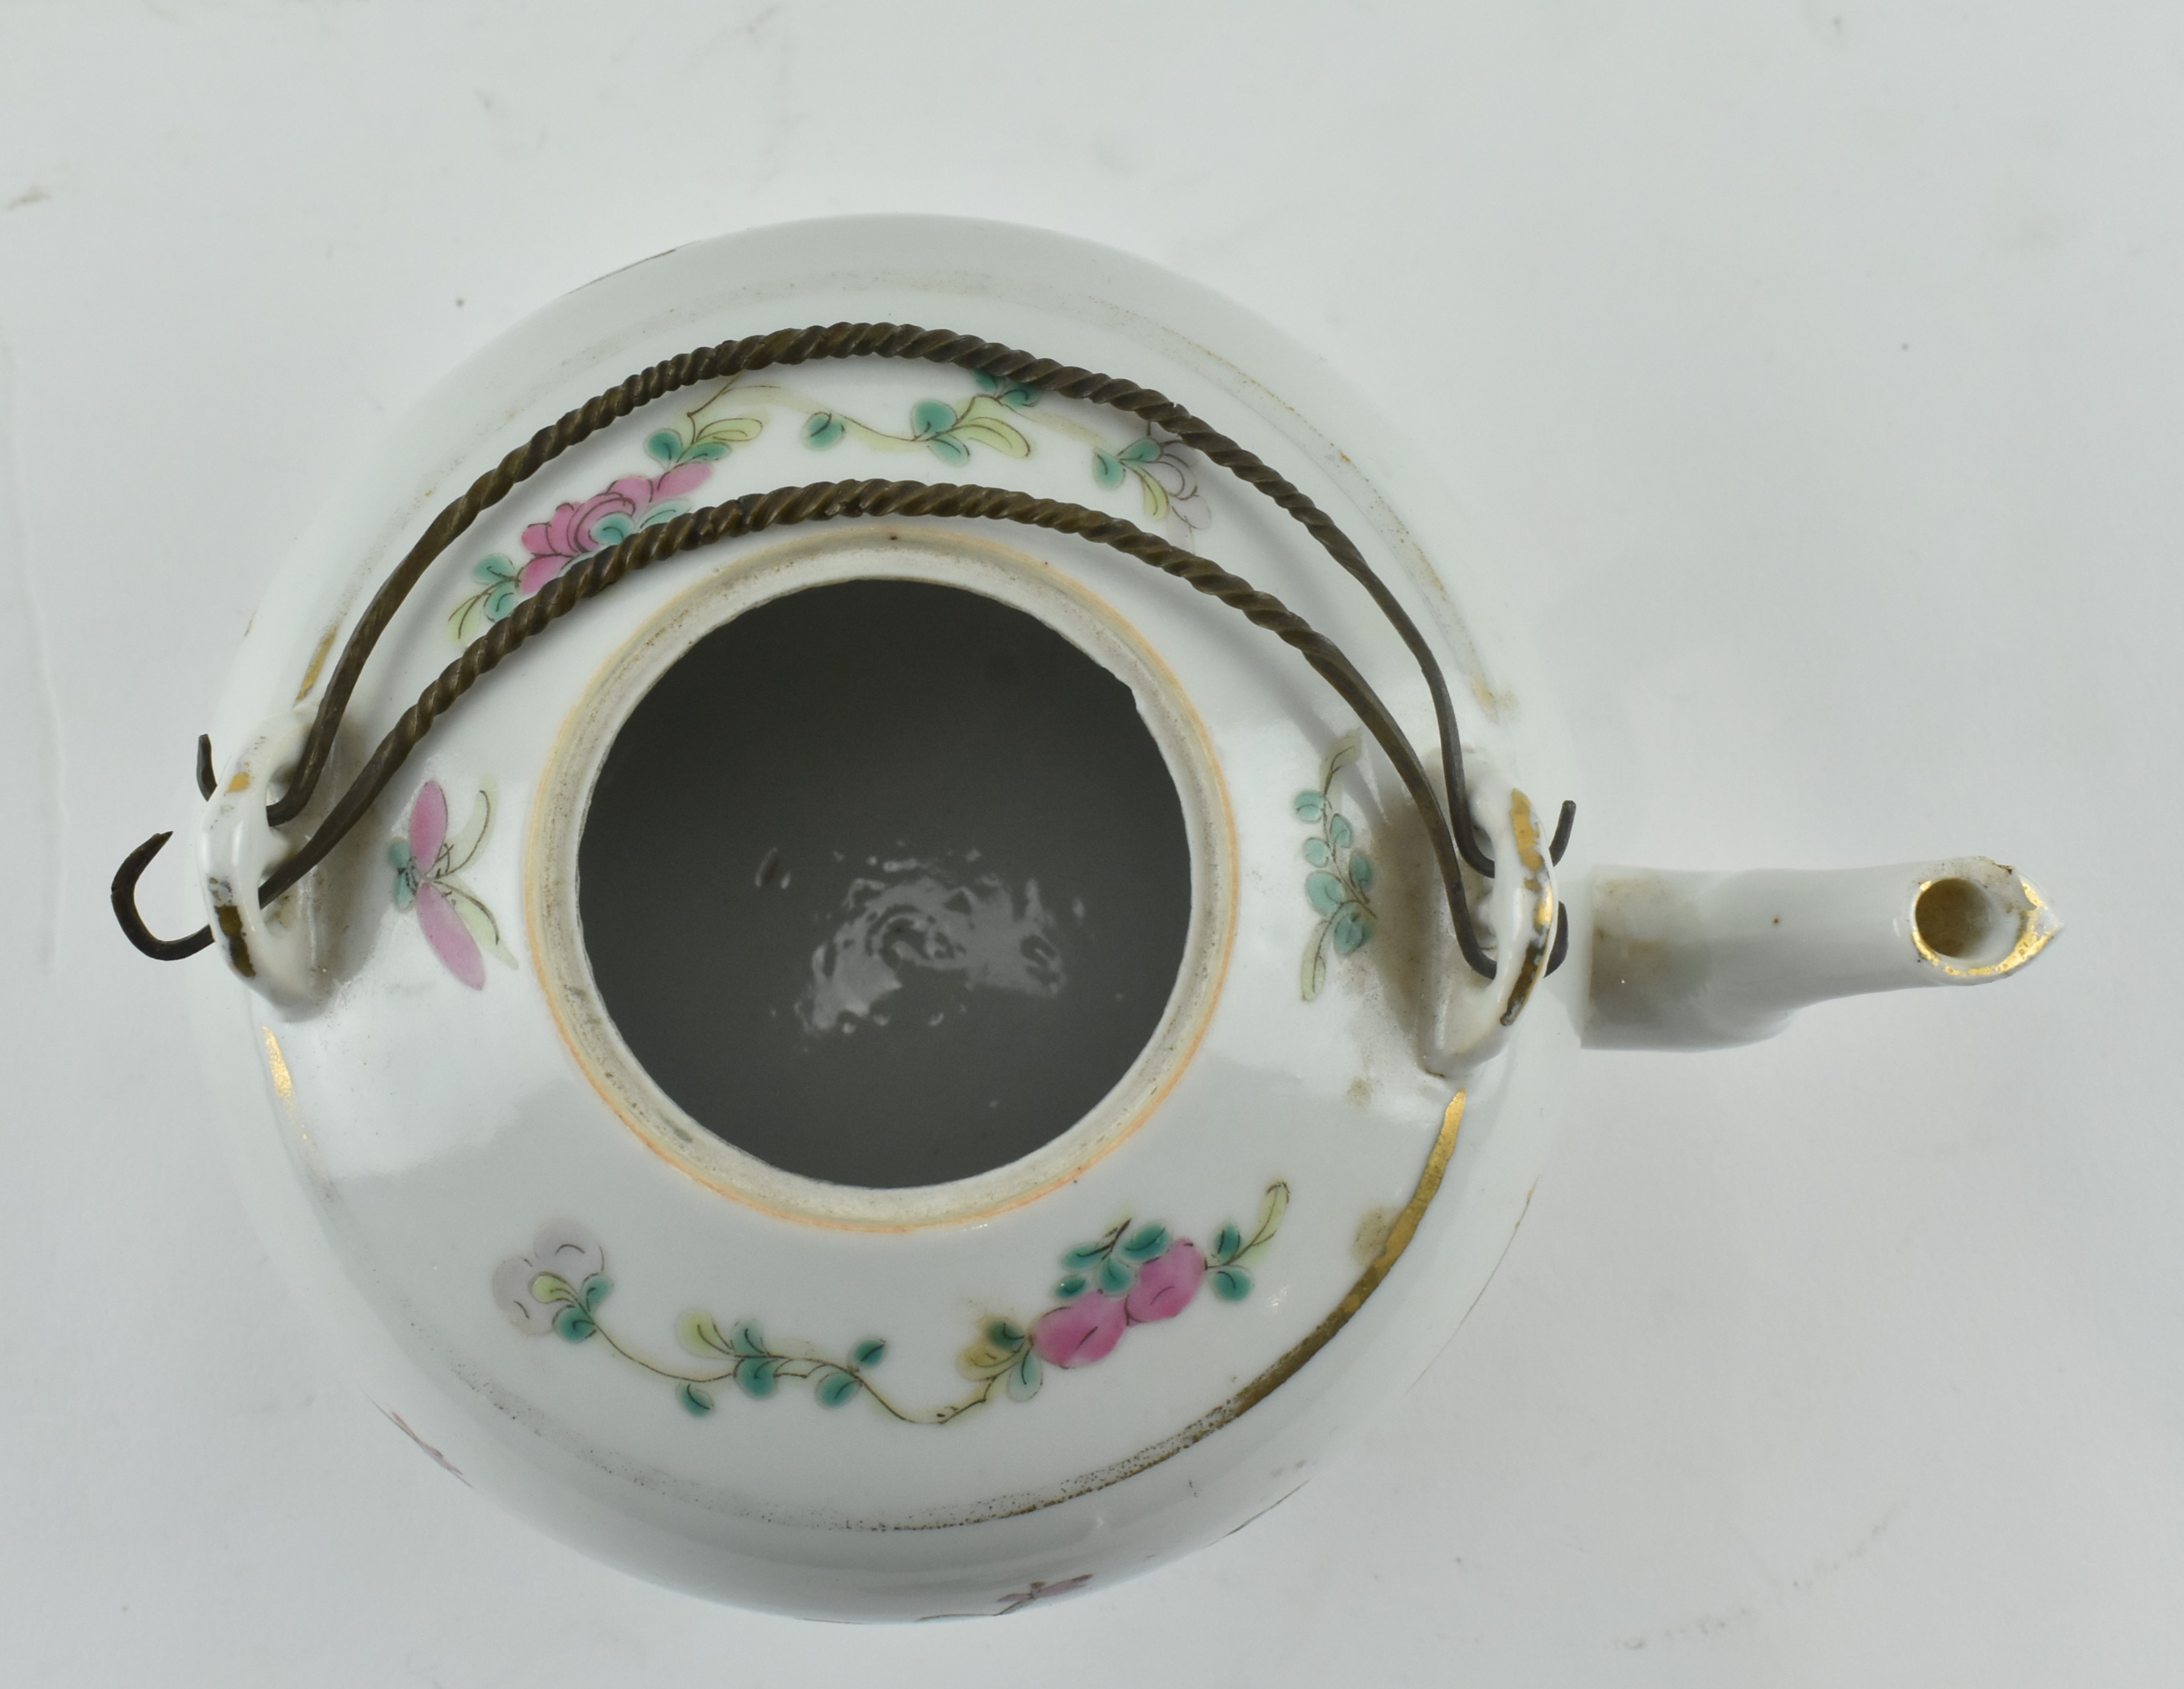 LATE QING DYNASTY FAMILE ROSE TEAPOT 晚清 粉彩戏婴茶壶 - Image 4 of 7